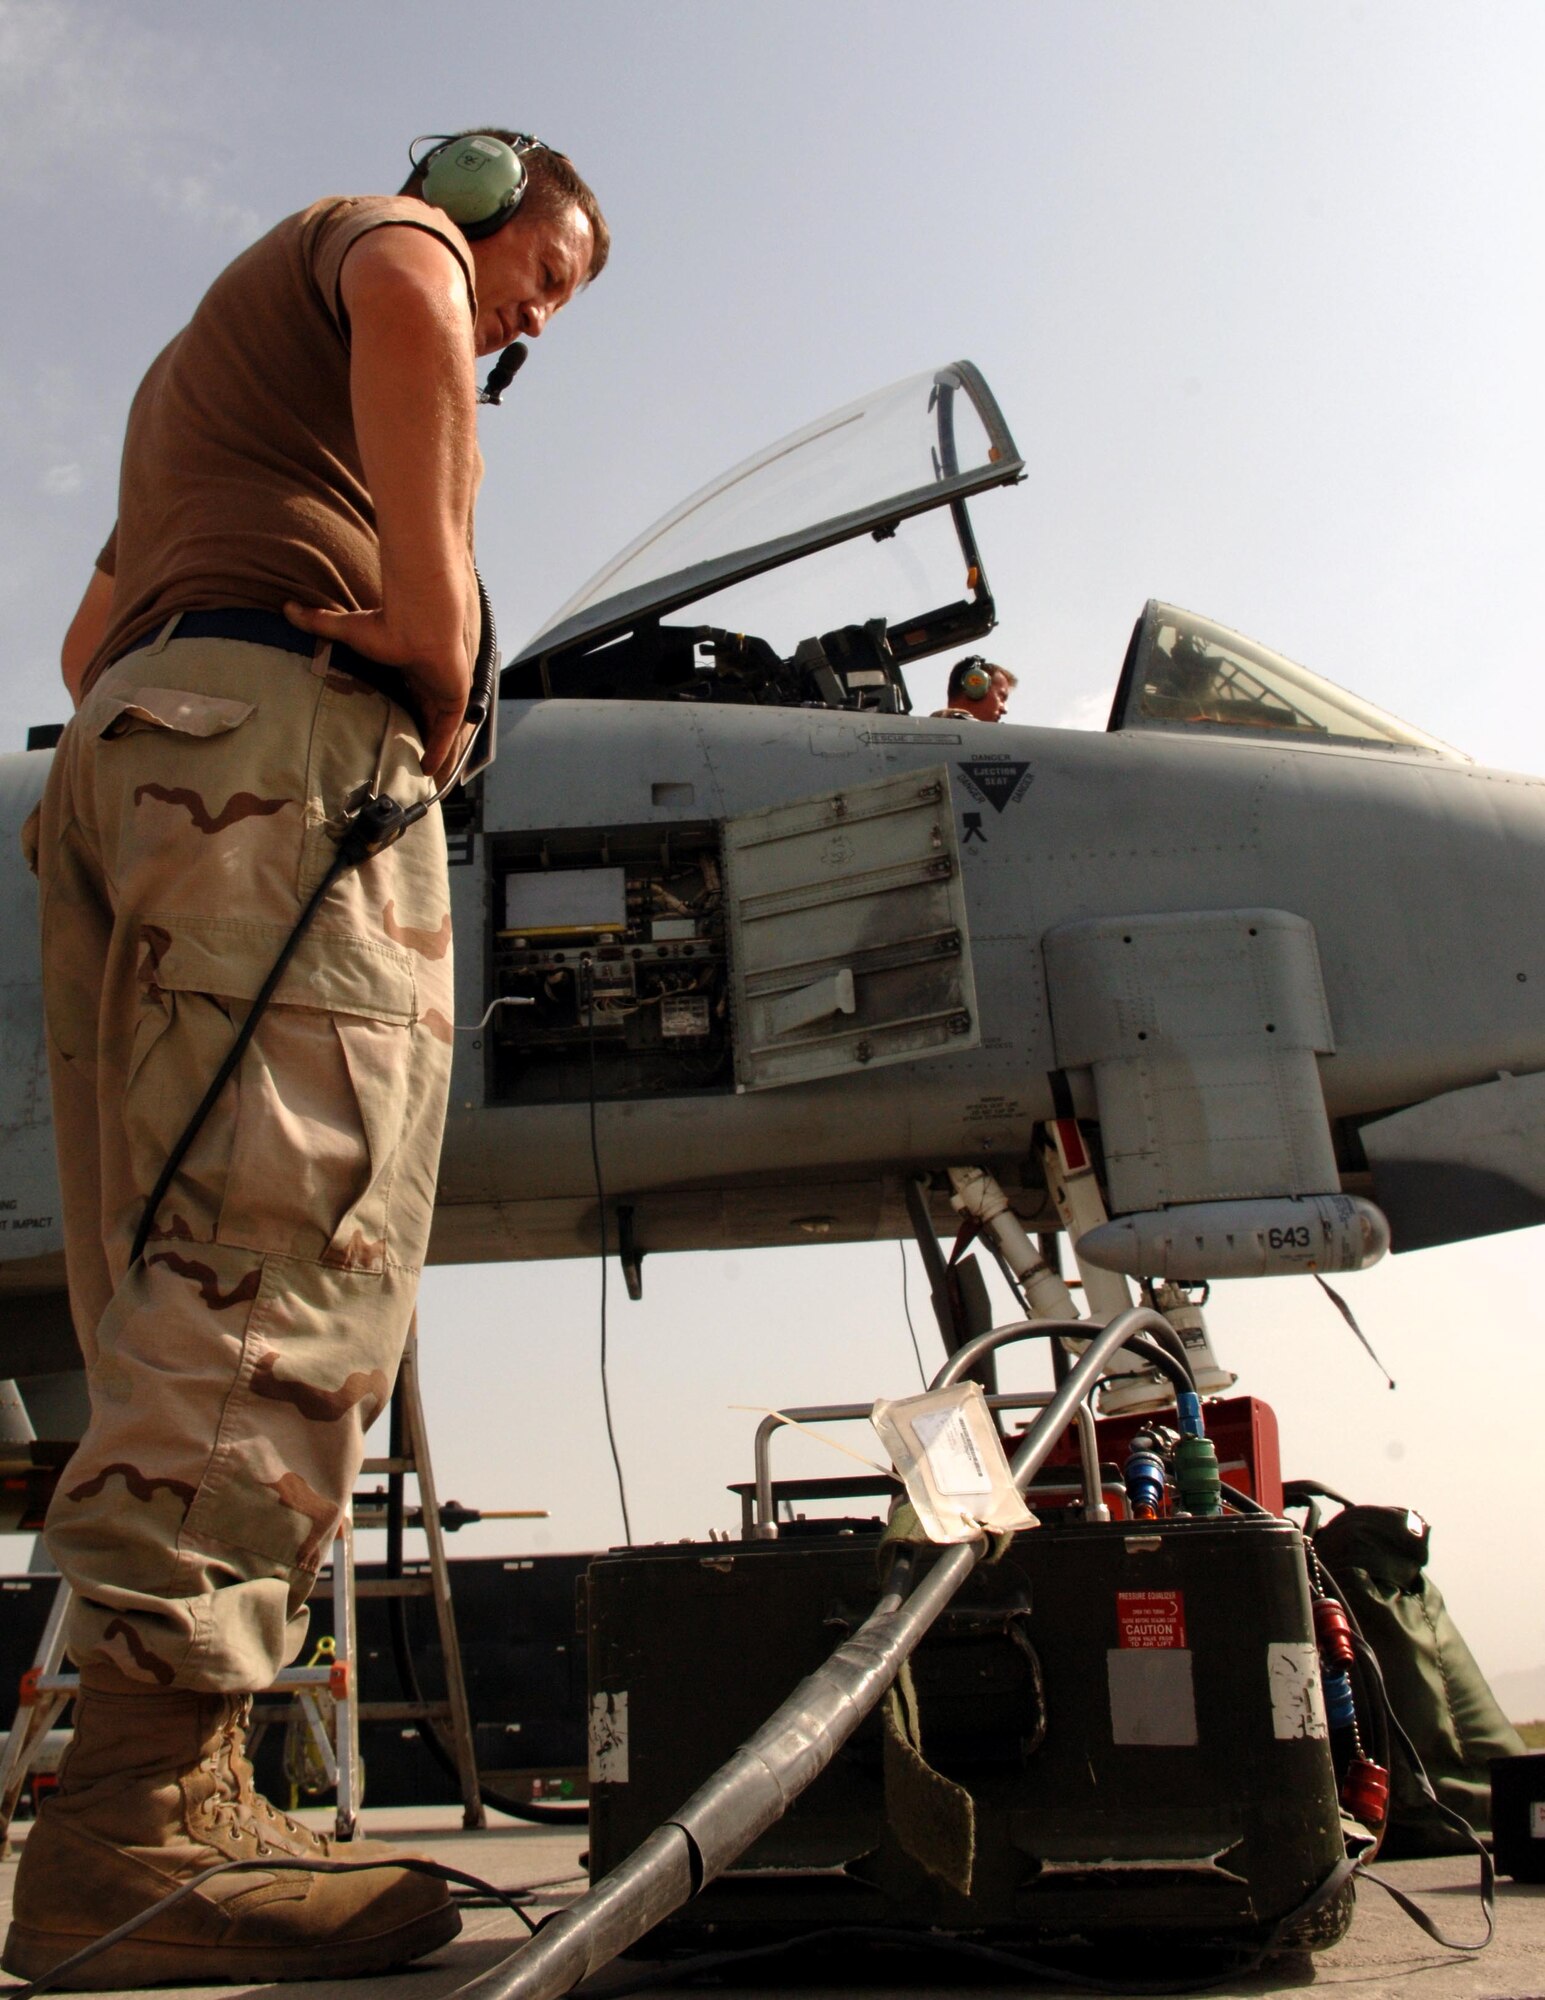 Tech. Sgt. Carl Clark (left) and Master Sgt. Dan Abrams perform an altimeter check on an A-10 Thunderbolt II at Bagram Air Base, Afghanistan, on Aug. 17. They are deployed from the Air Force Reserve Command's 442nd Fighter Wing at Whiteman Air Force Base, Mo. (U.S. Air Force photo/Master Sgt. Orville F. Desjarlais Jr.)